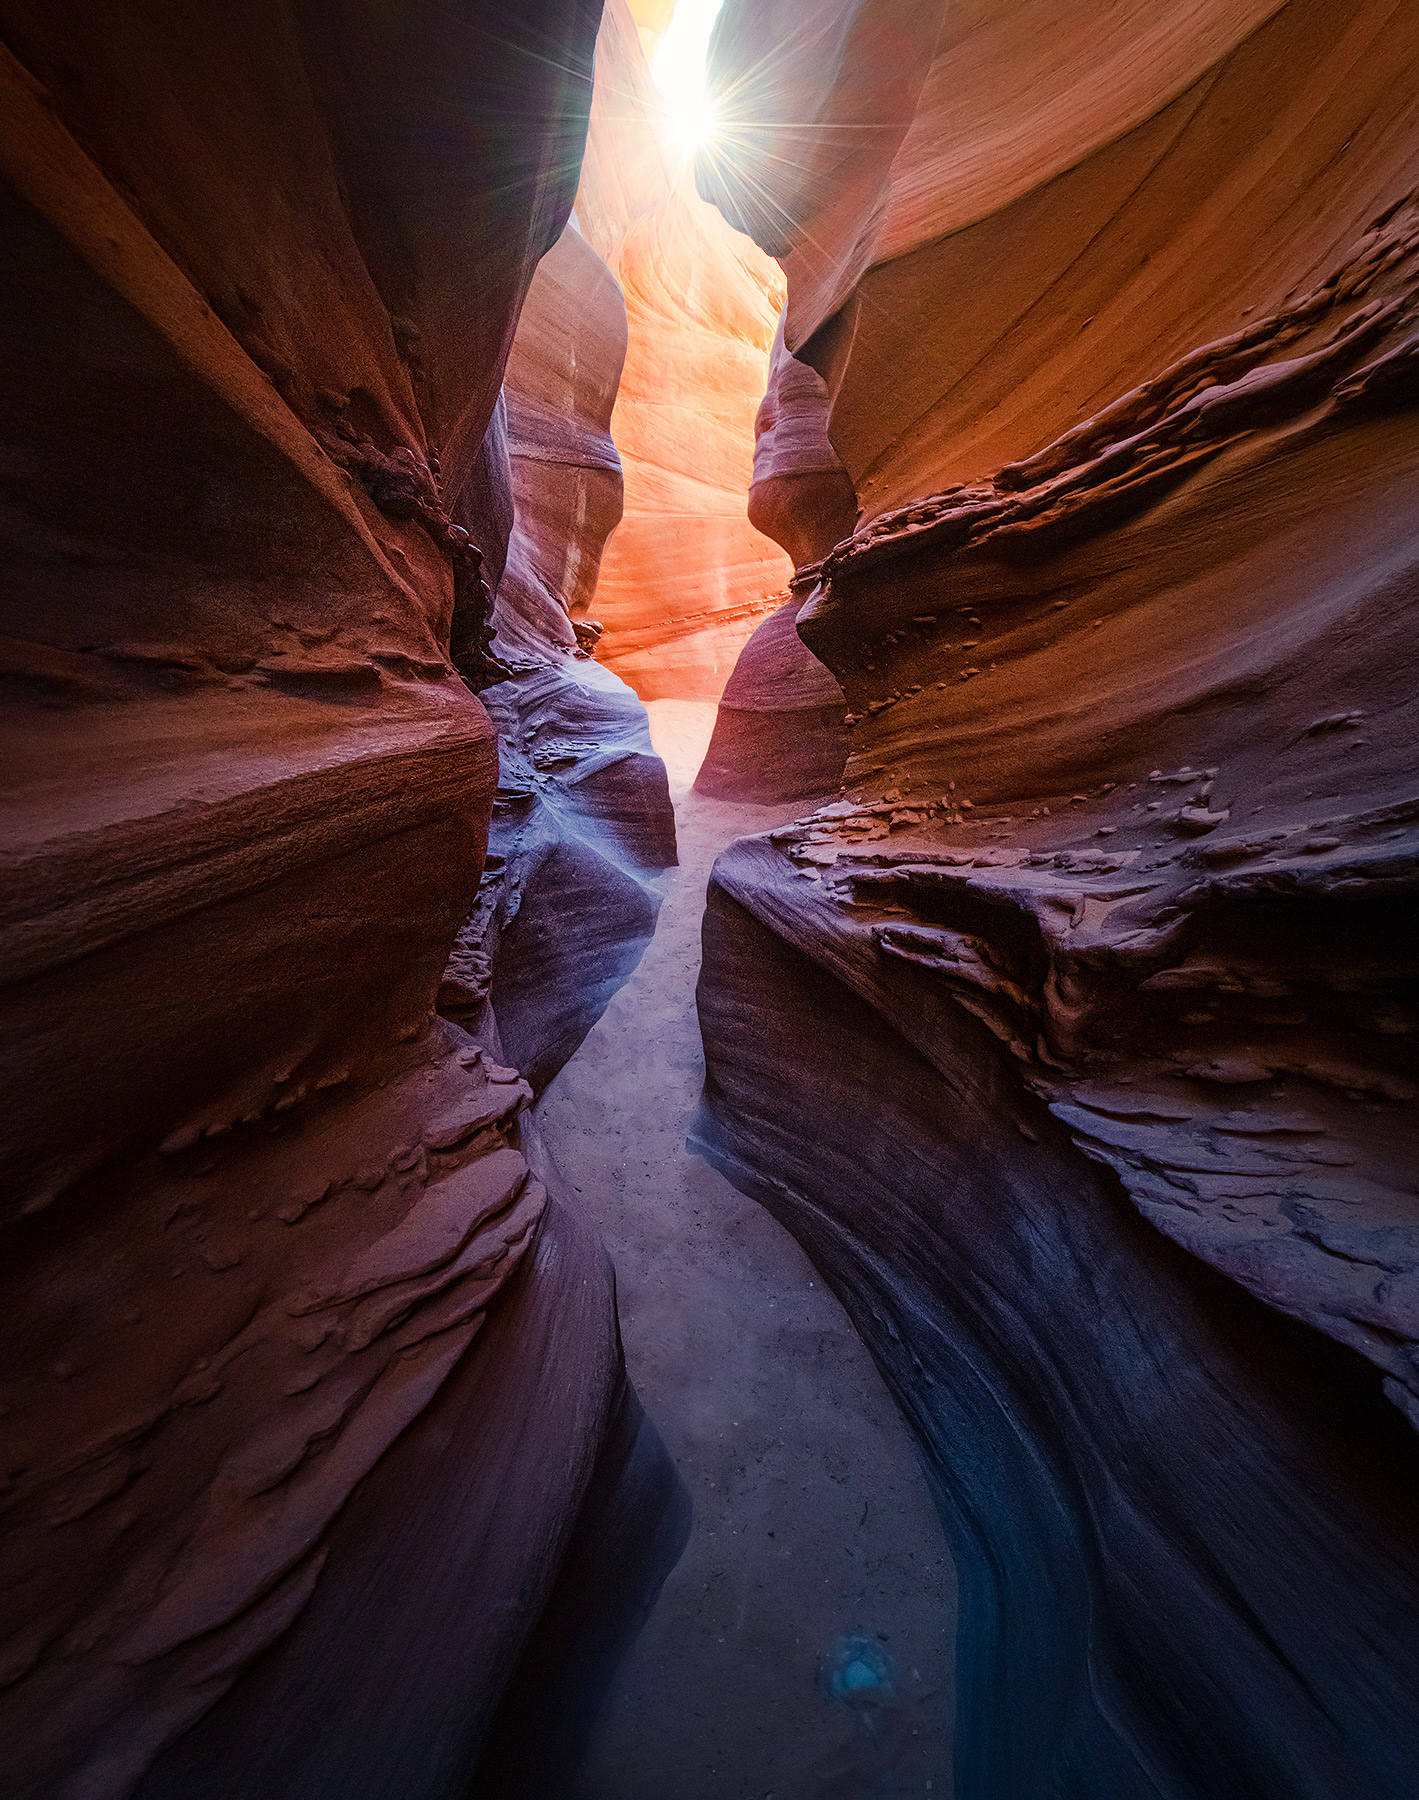 A few days per year the sun peaks into the depths of this slot canyon at just the right angle to capture it.